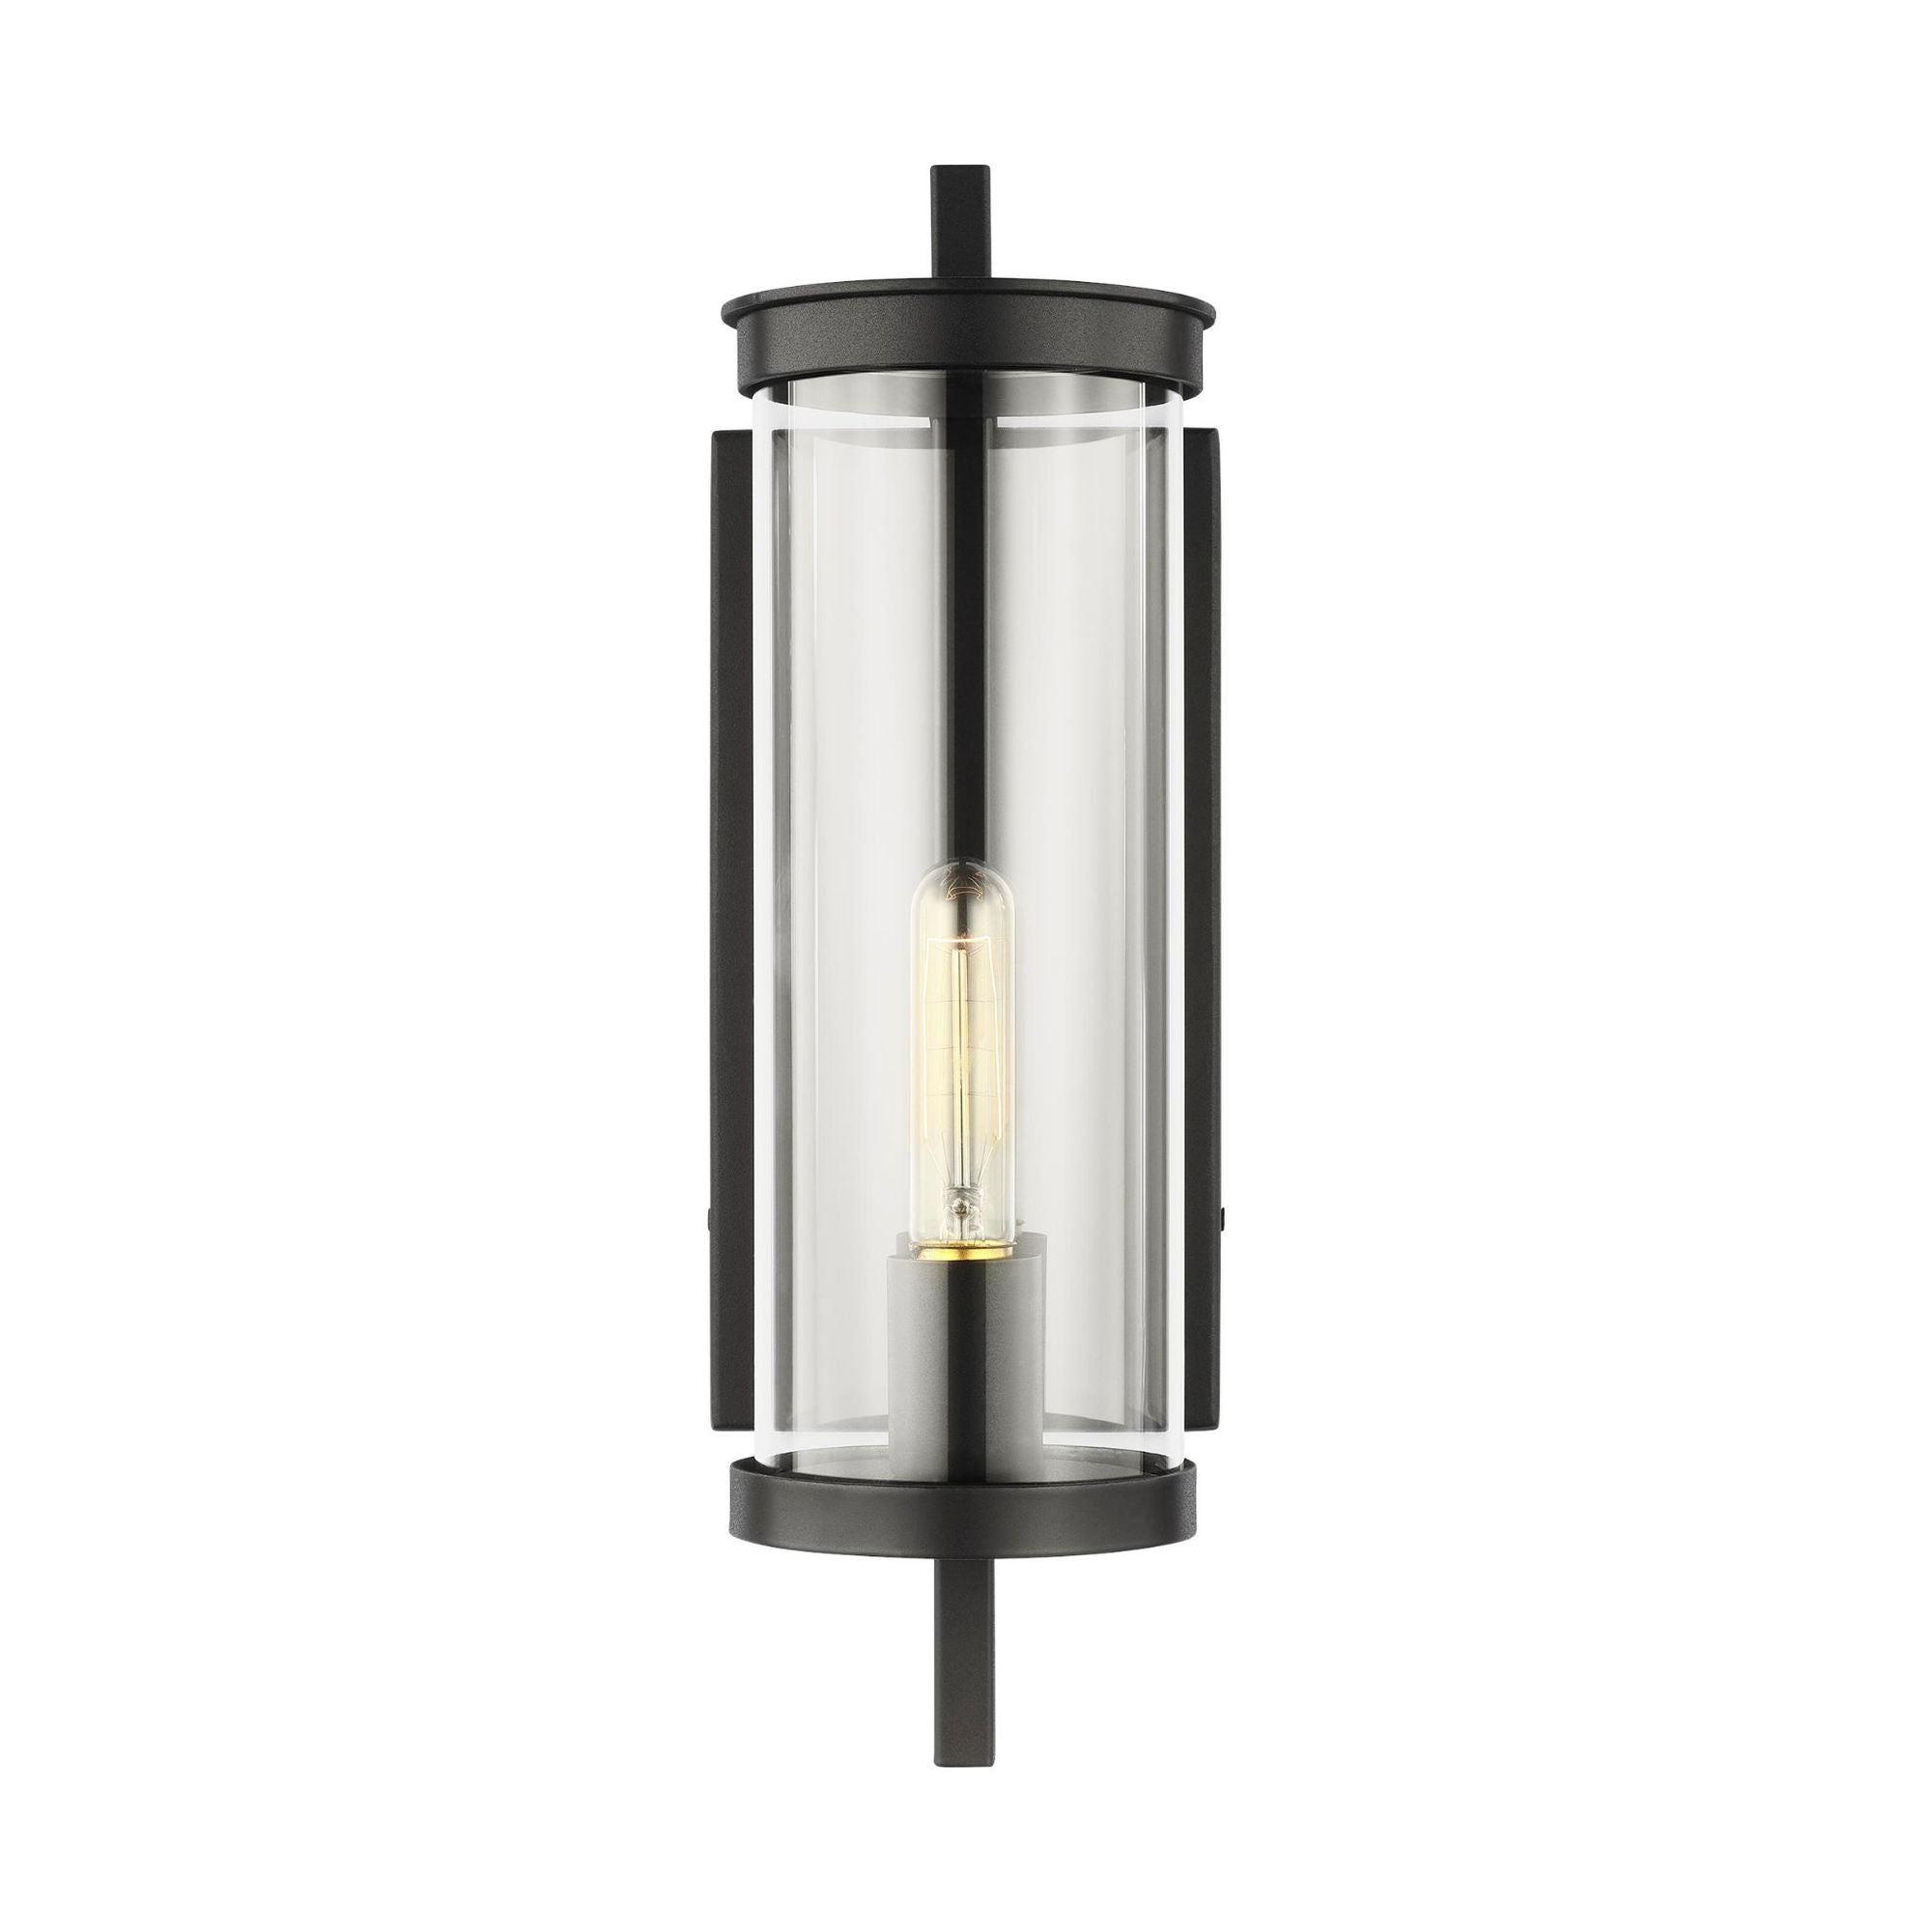 Chapman & Myers Eastham Small Wall Lantern in Textured Black